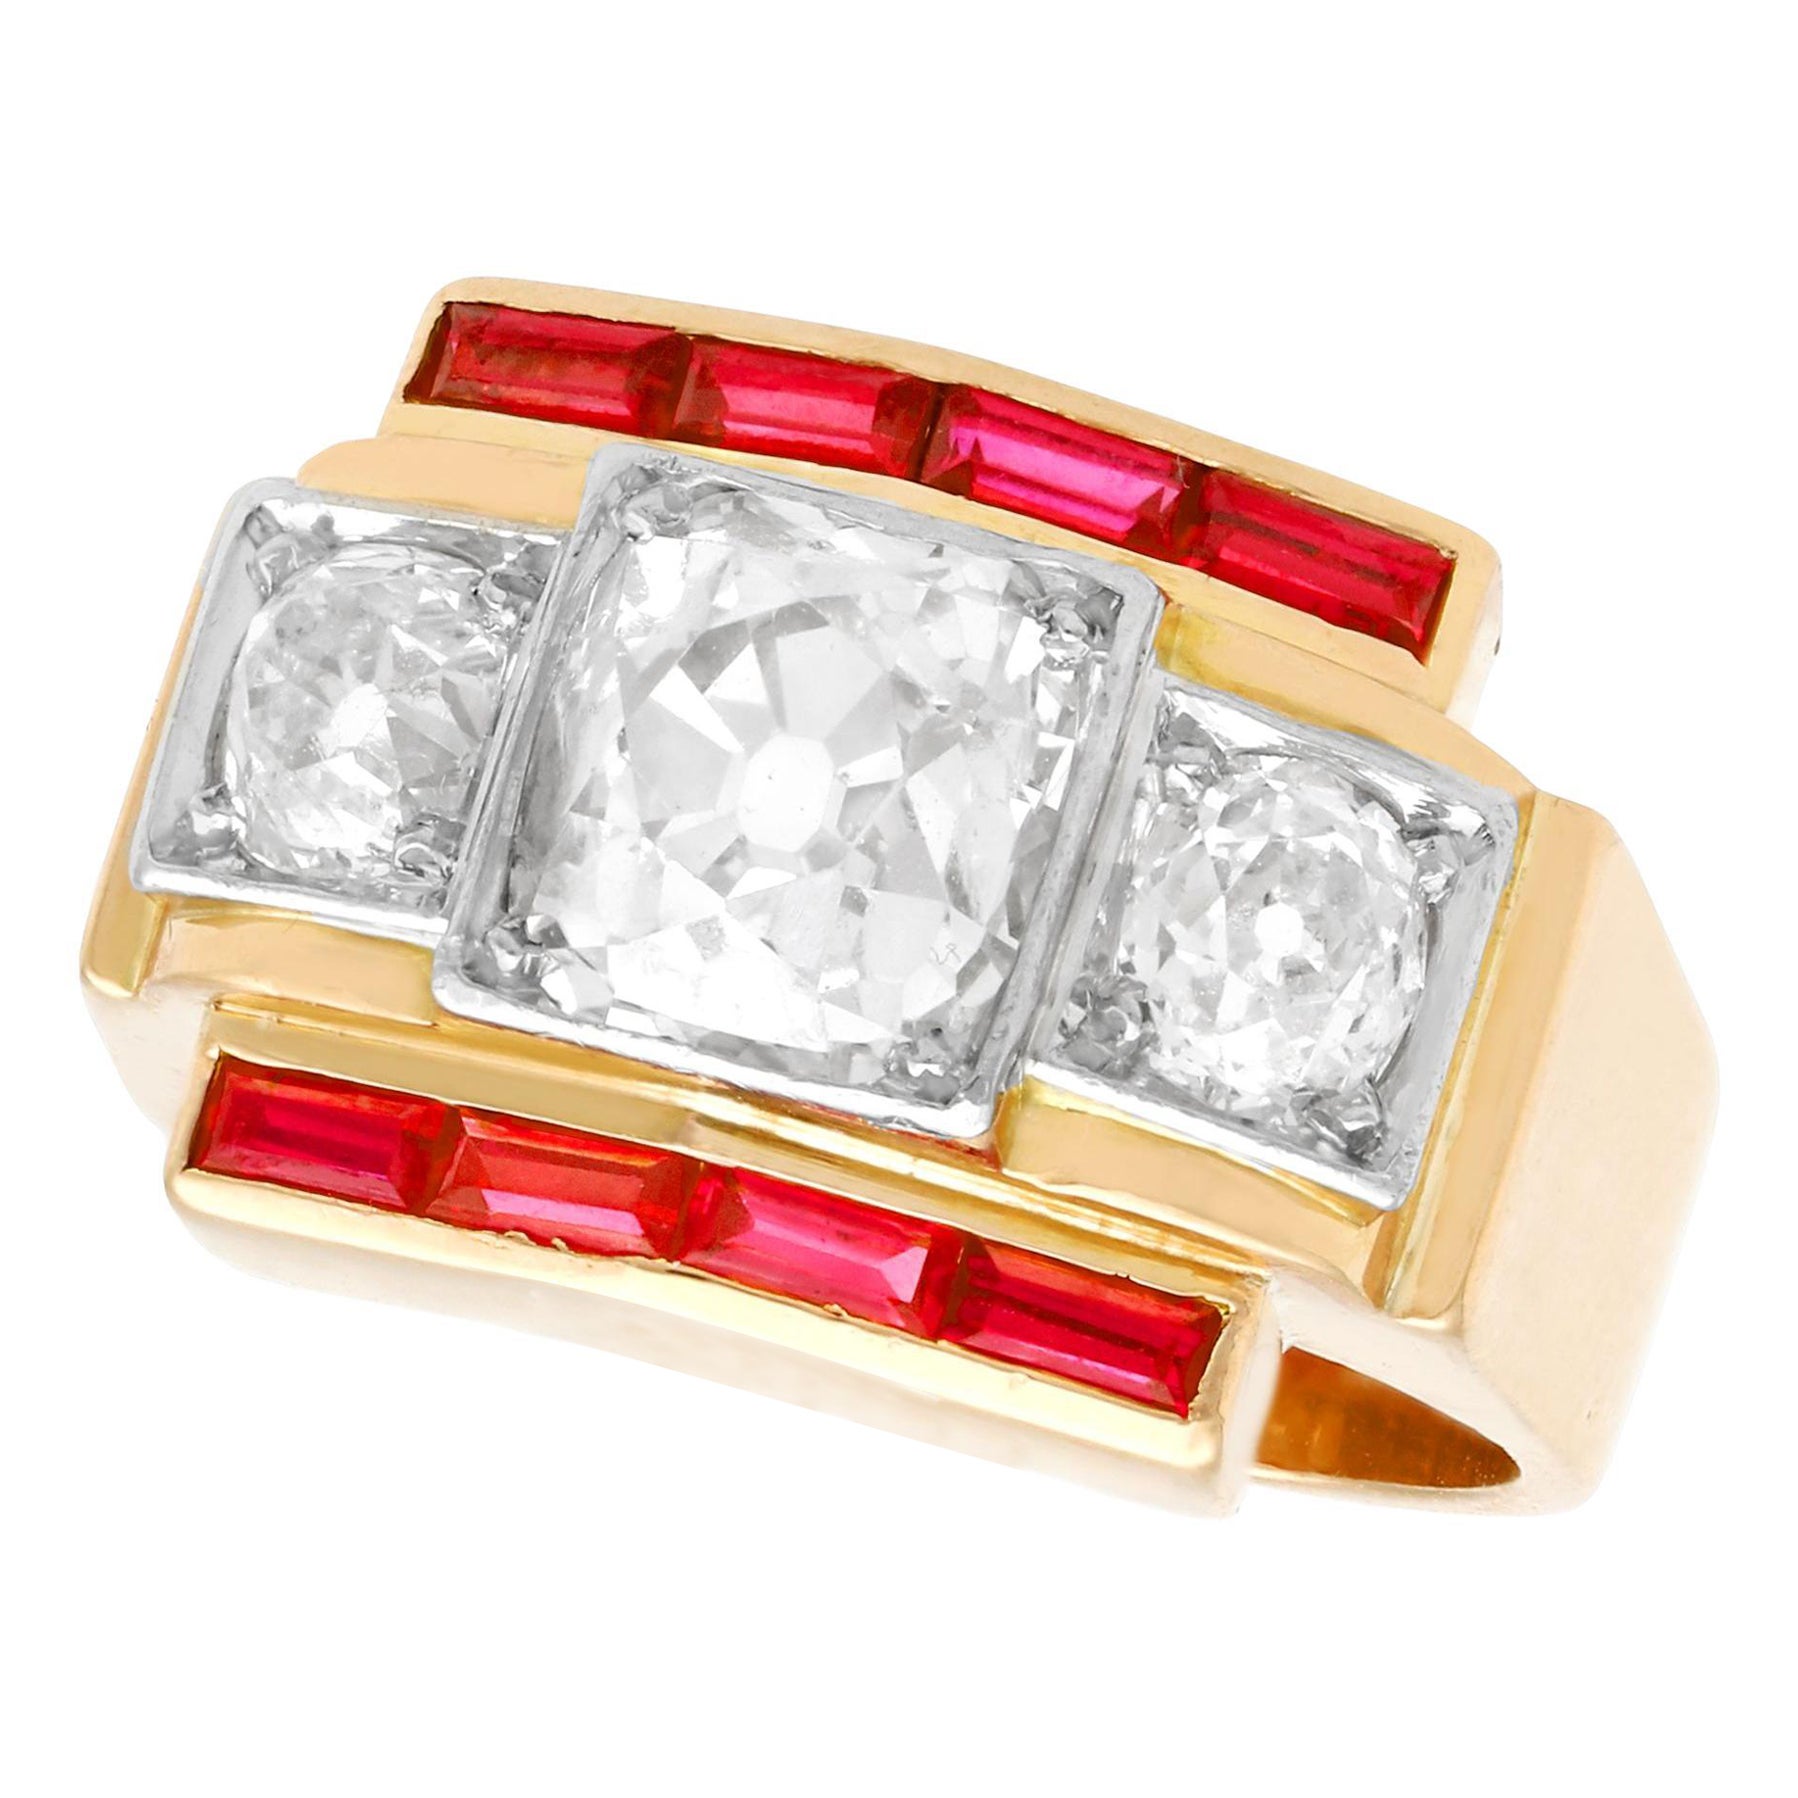 Vintage French 2.28 Carat Diamond and Ruby Yellow Gold Cocktail Ring, circa 1940